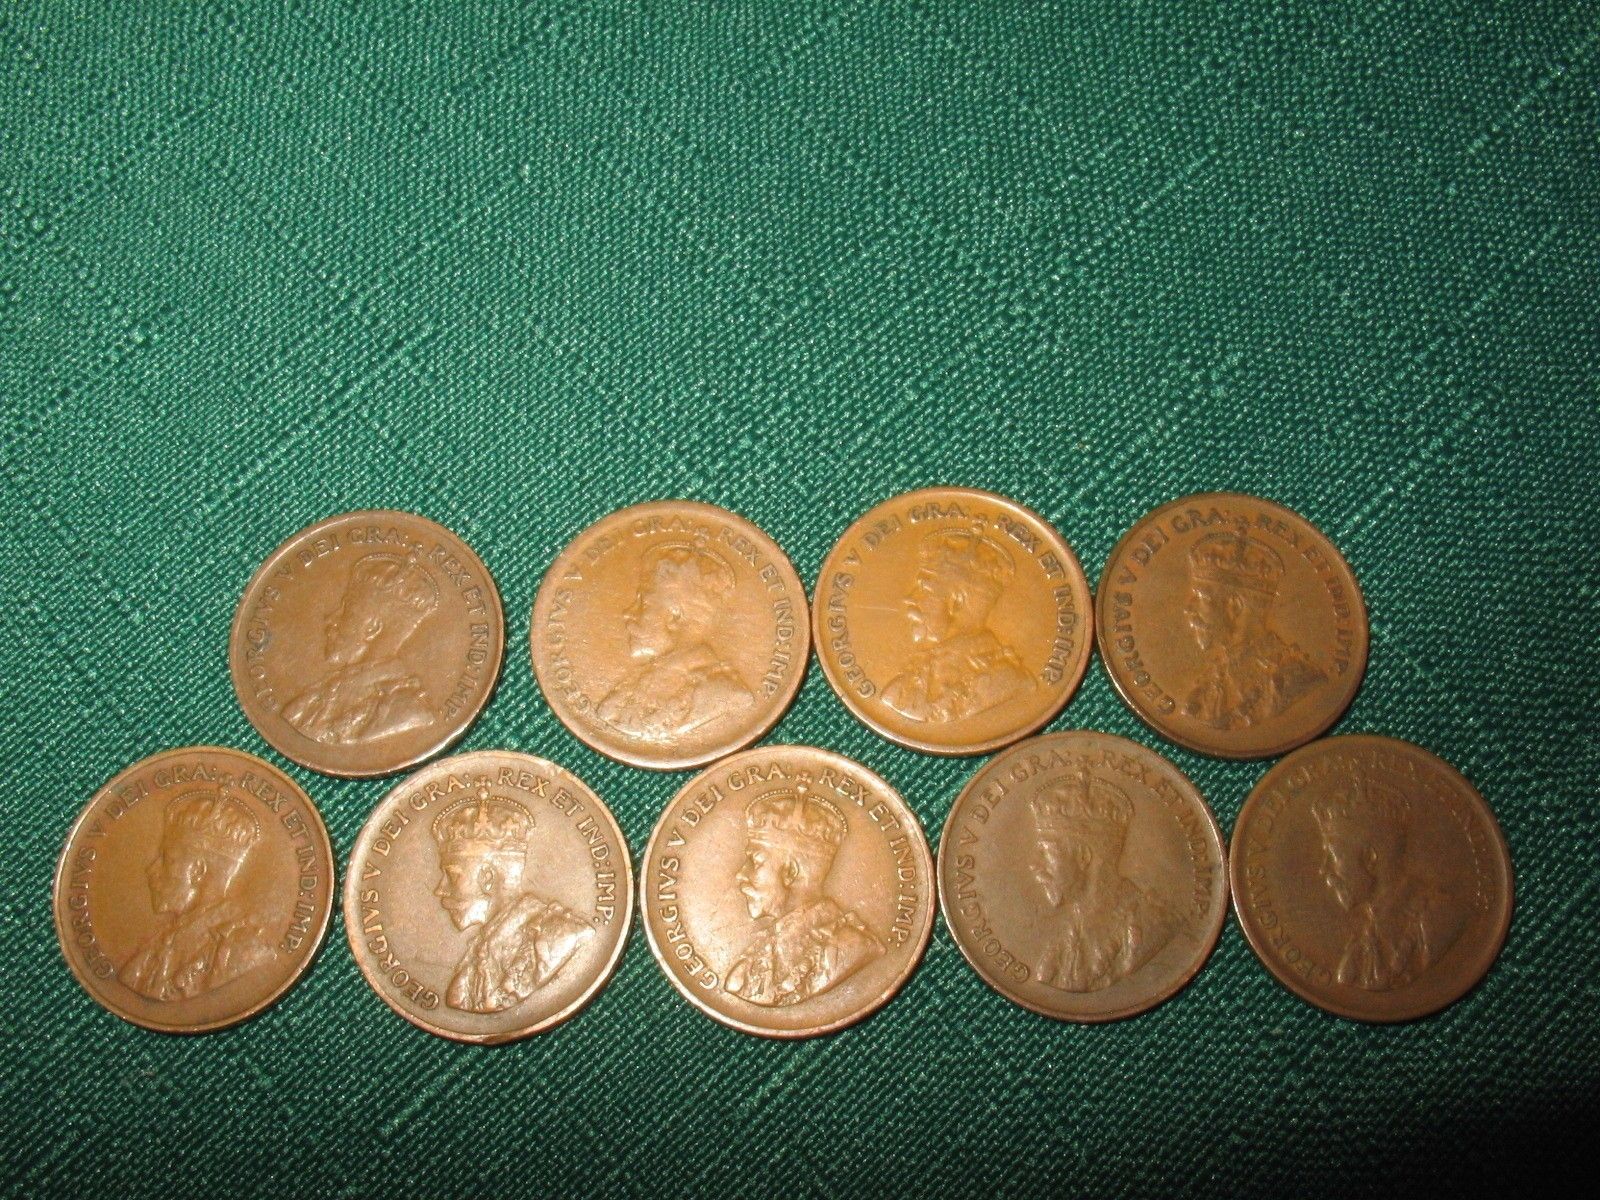 KING GEORGE V SMALL COPPER CENTS (21) coins